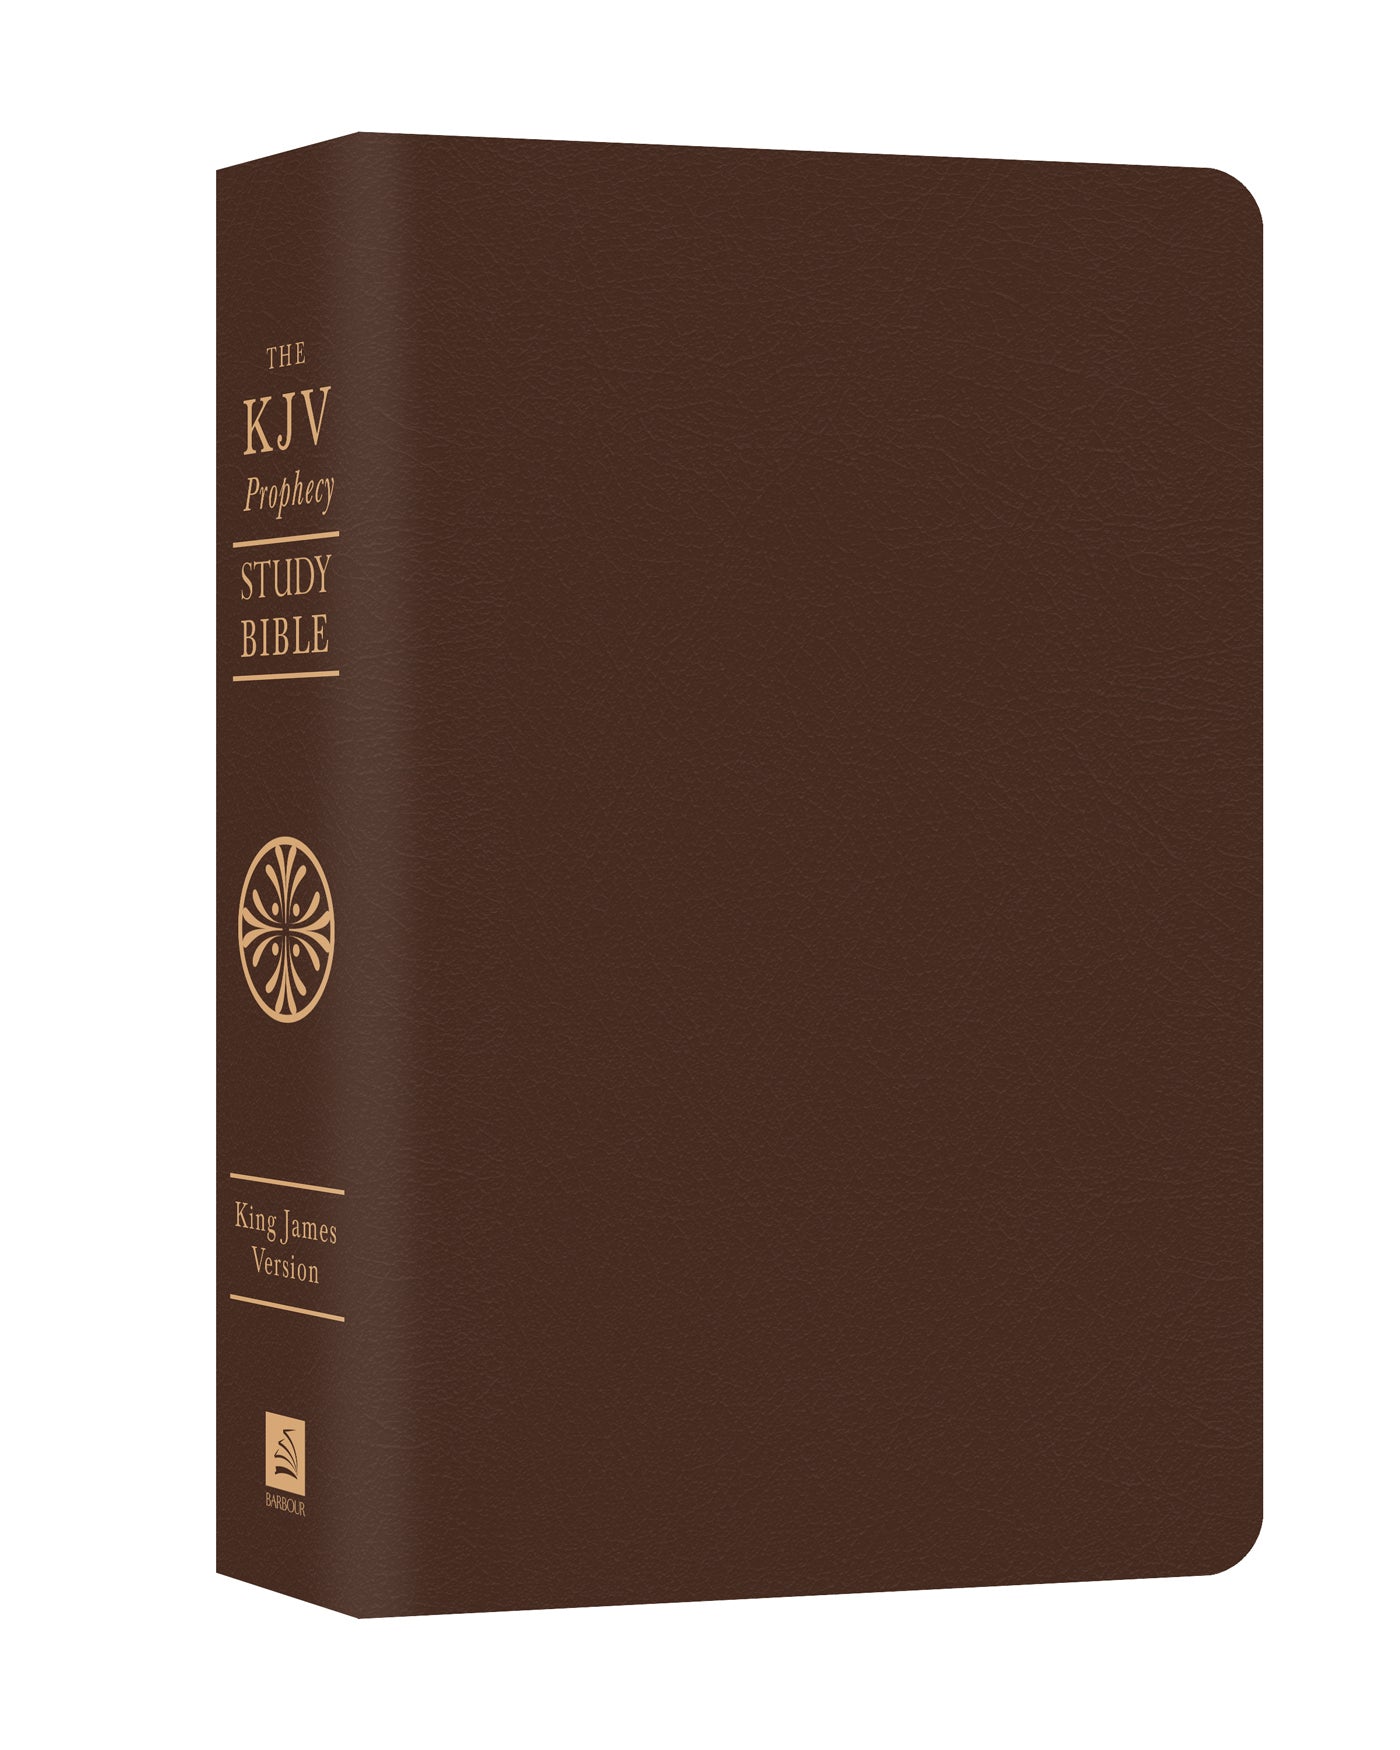 Image of The KJV Prophecy Study Bible other